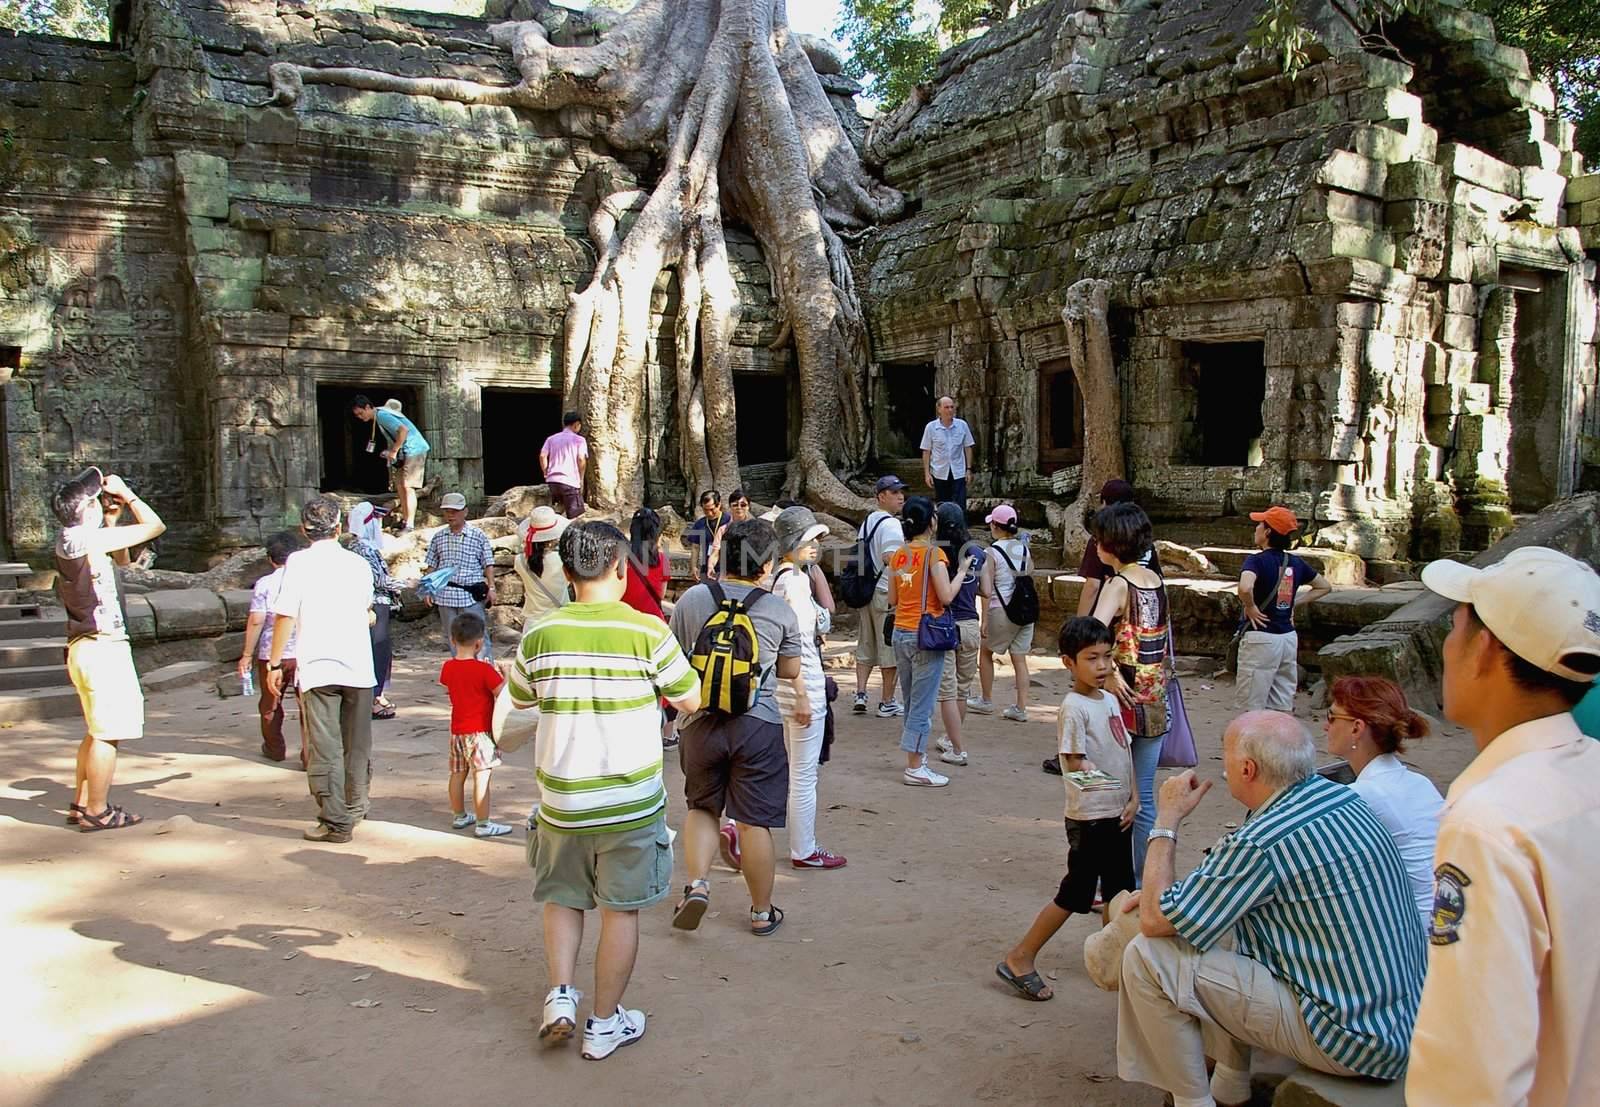 Tourists crowd around part of the famous Bayon temple. This location has been used in various films, such as Indiana Jones and the Temple of Doom and Lara Croft: Tomb Raider. Siem Reap, Cambodia 17.11.09